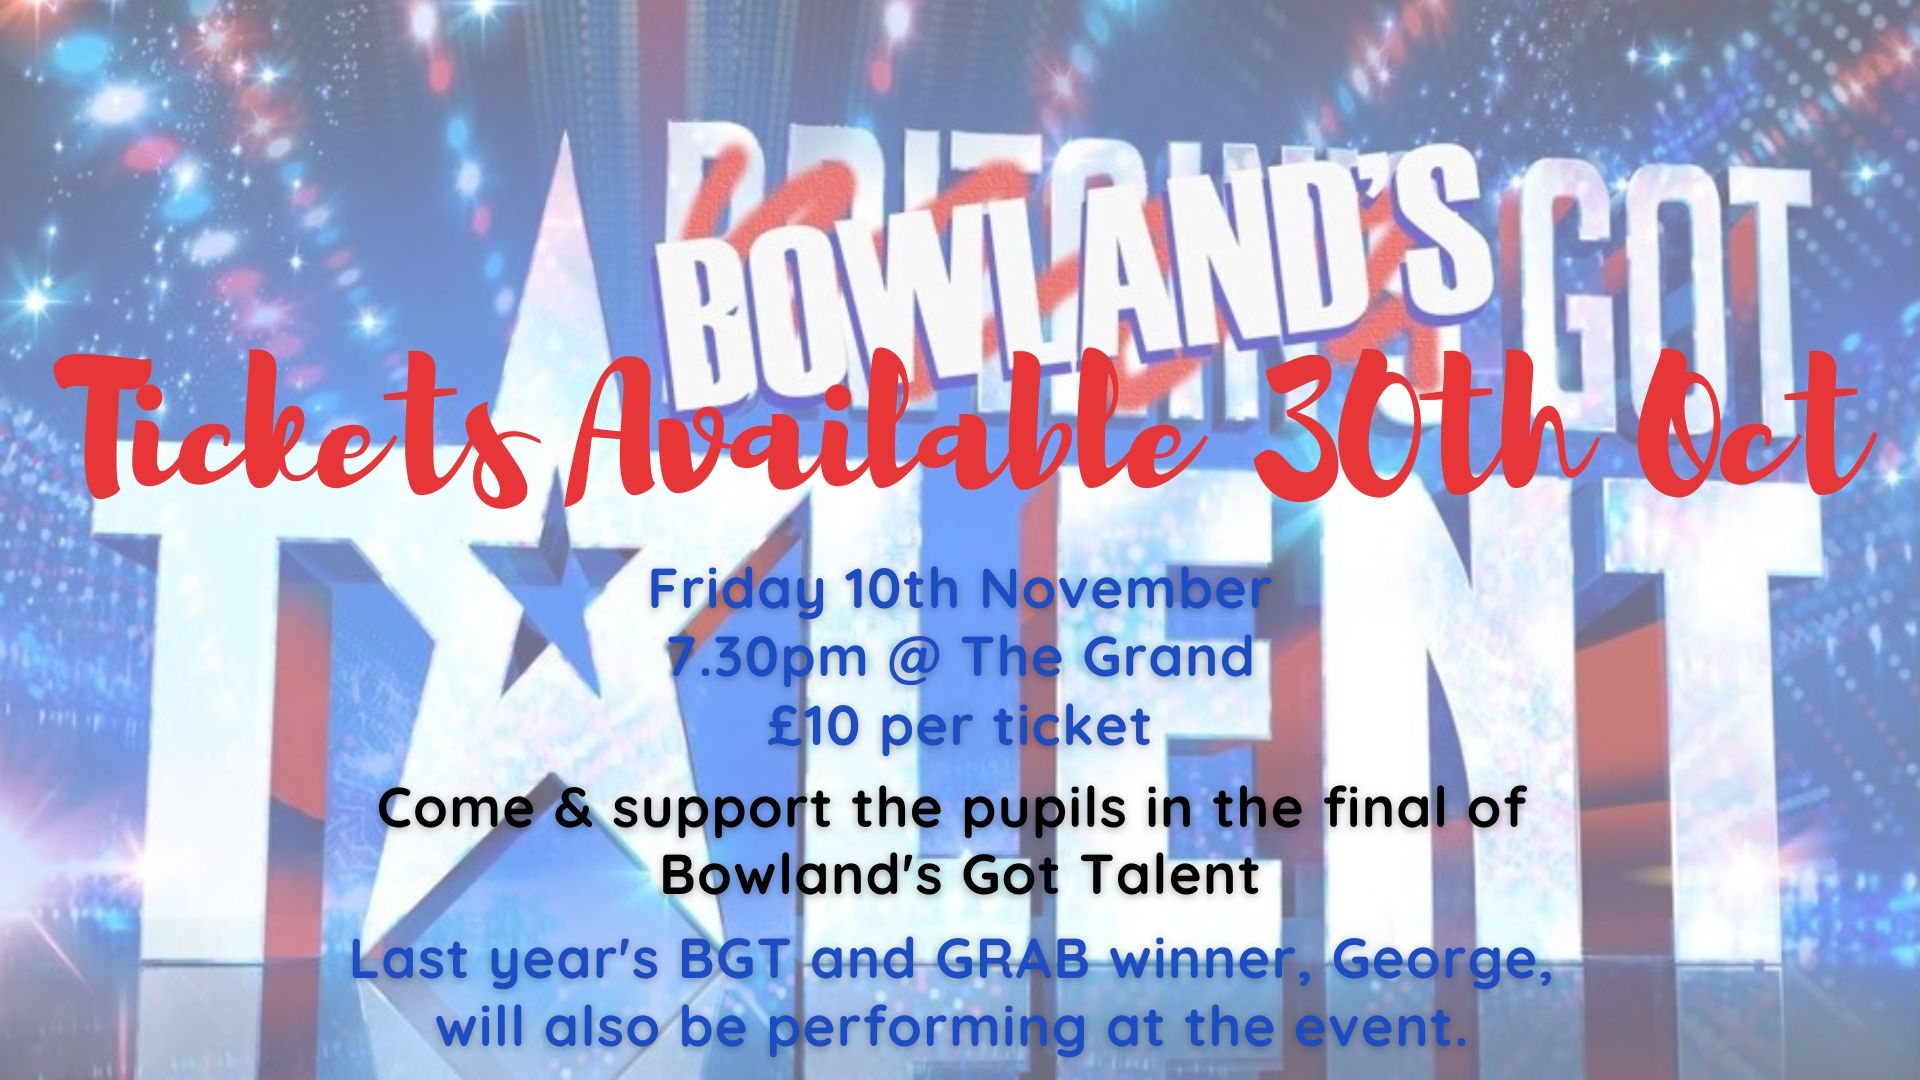 Support Bowland at The Grand for Bowland’s Got Talent – tickets go on sale 30th October